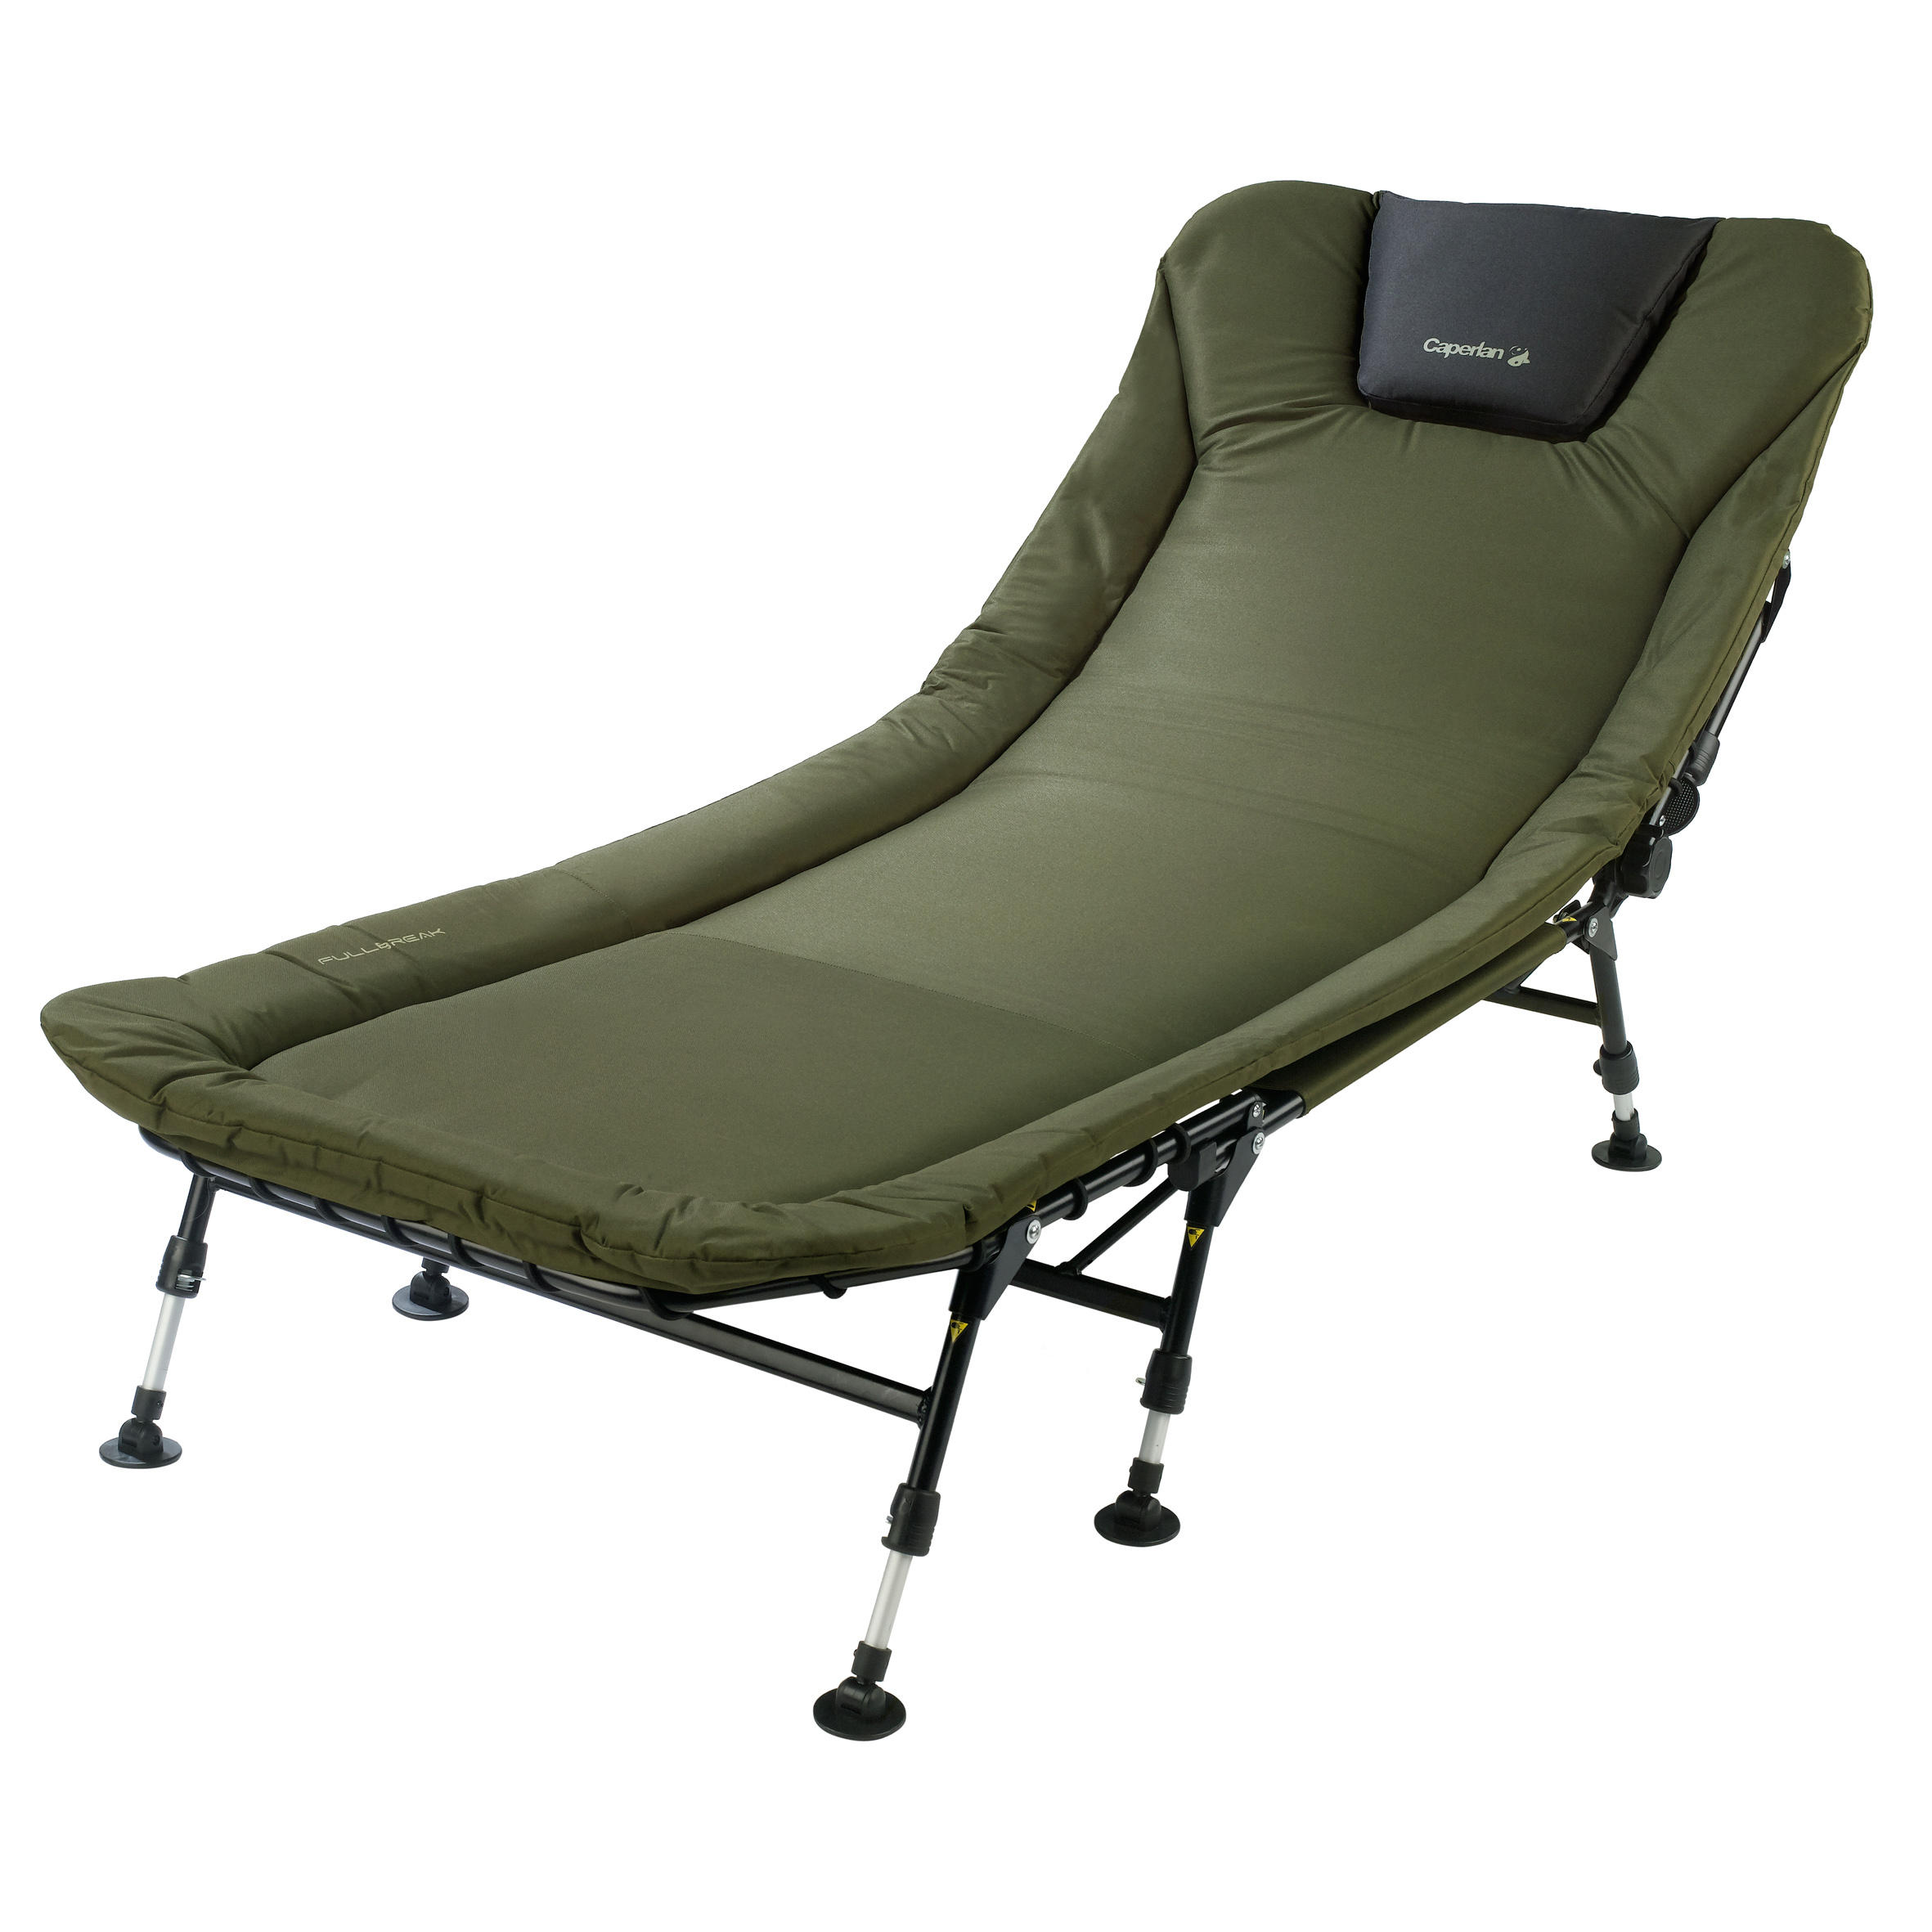 space saver chair bed